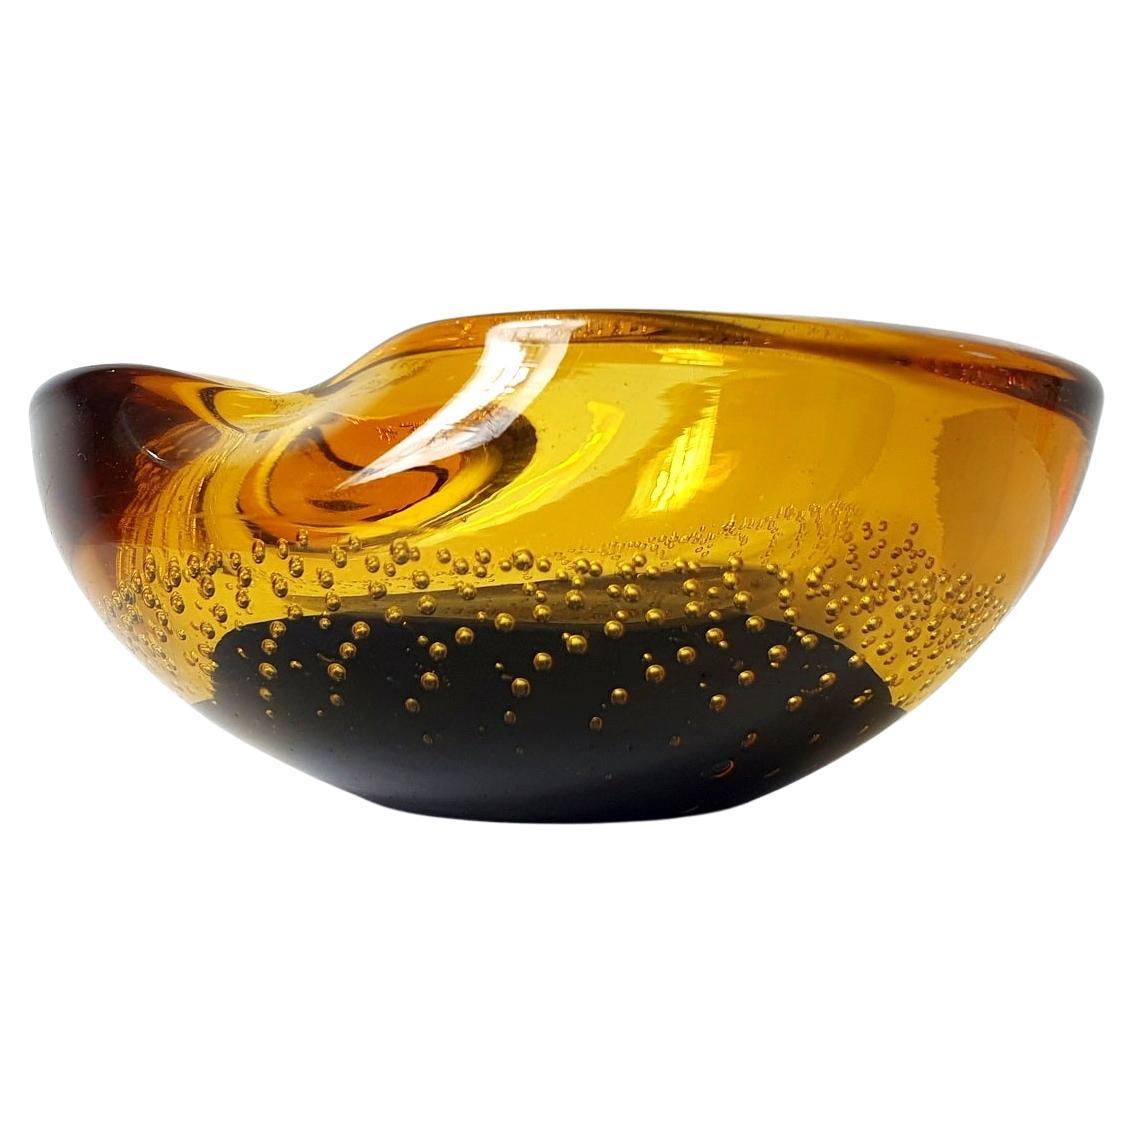 Organic shaped 1960's glass bowl in two colors from Murano with air-bubble pattern. Excellent for putting your keys and what not's or as a snack bowl.